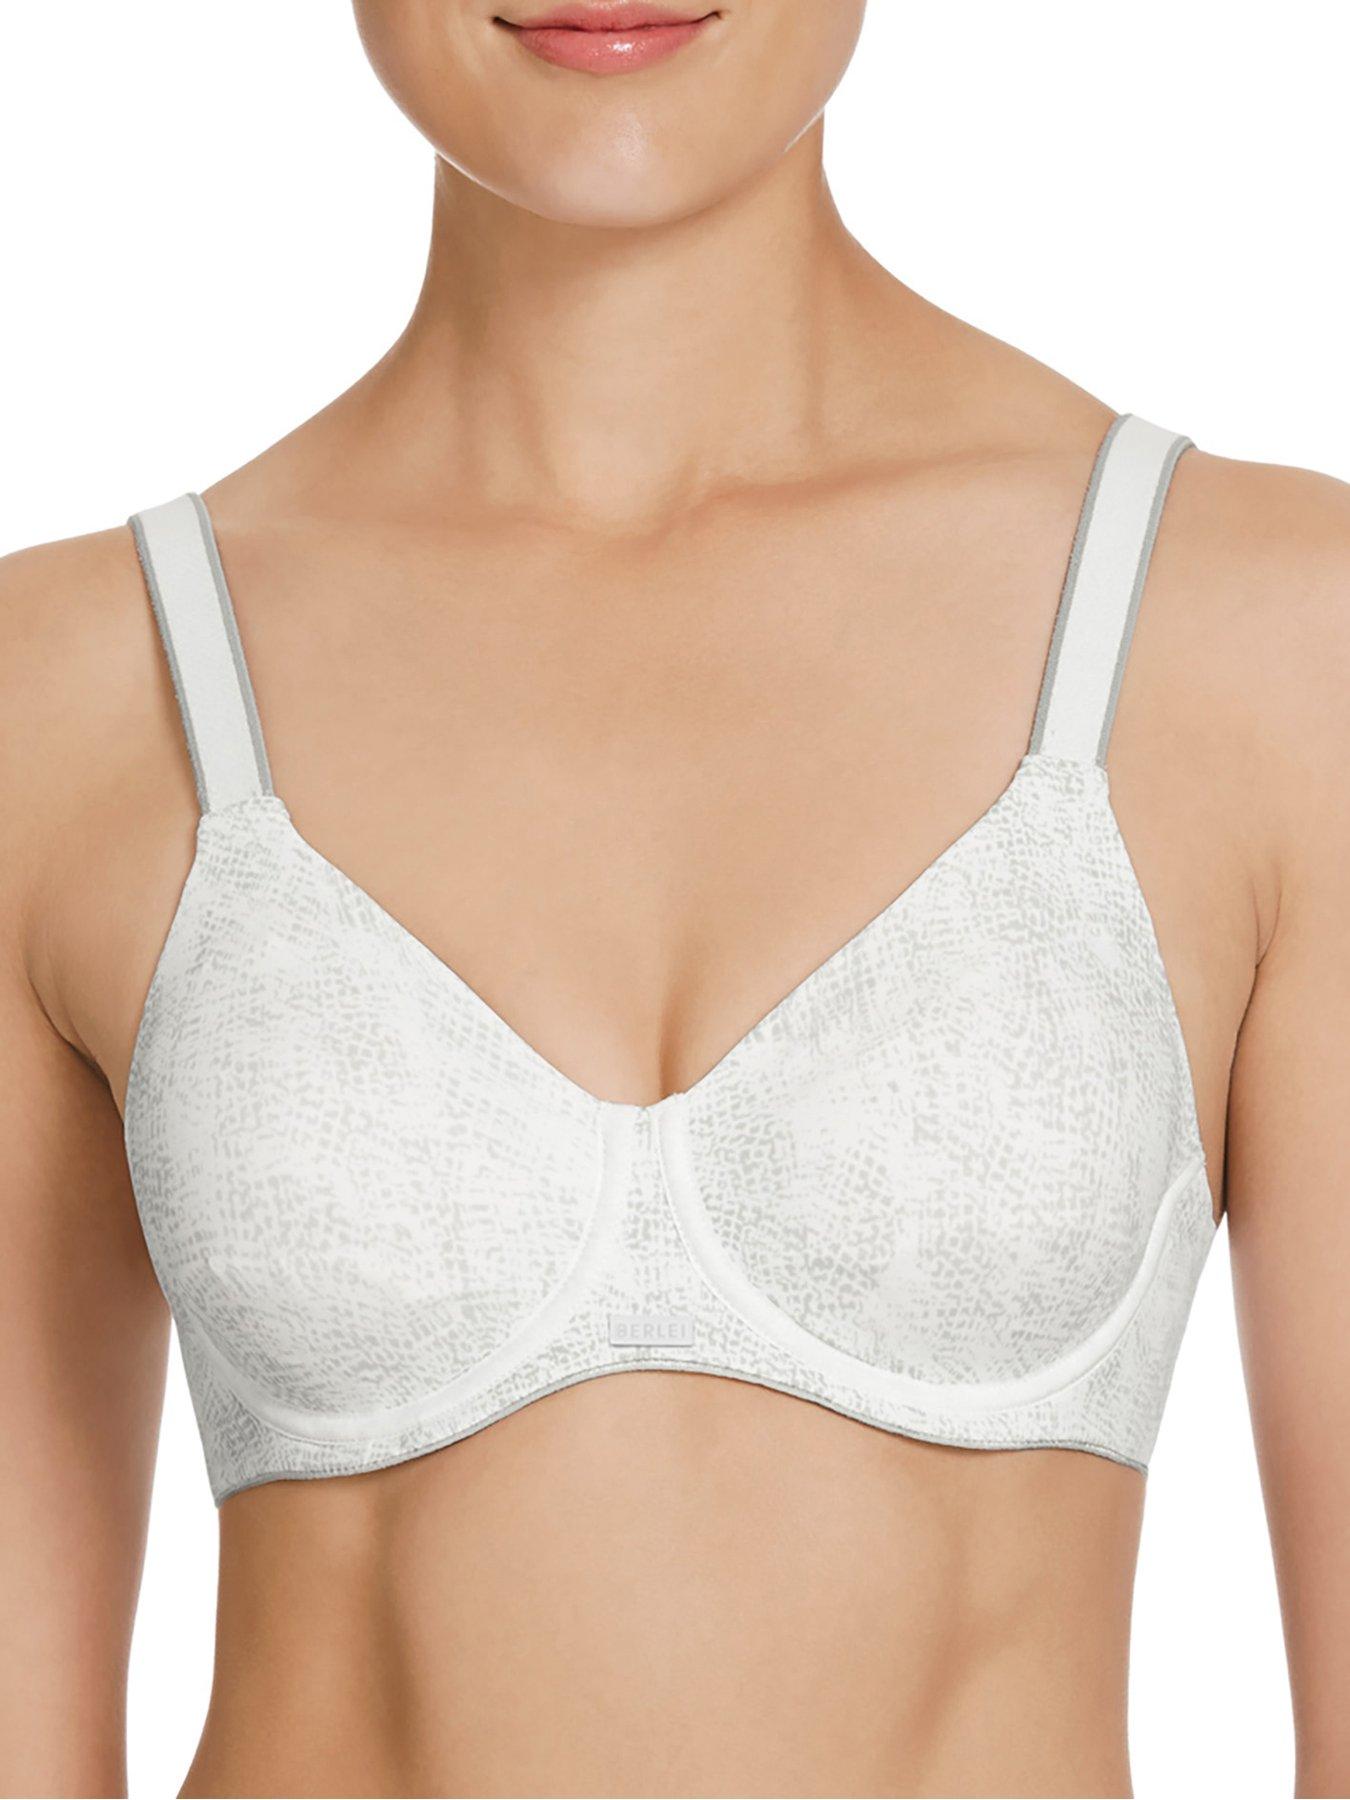 Berlei Bra stockist - Get Fitted in to a Berlei Bra at She Science